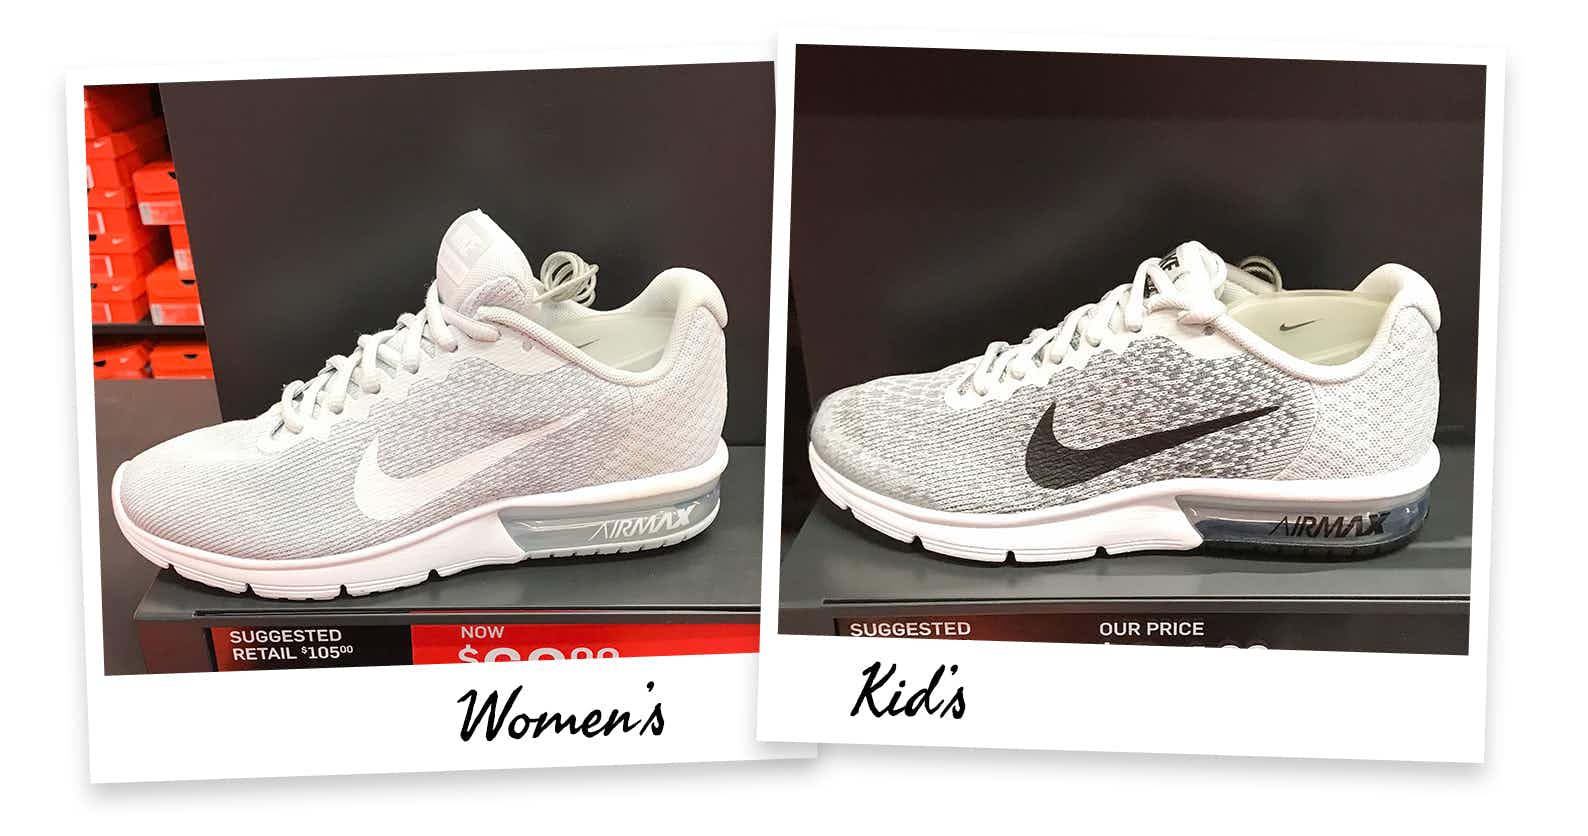 Nike Factory Outlet Sale Tips to Help You Save on Kicks - The Krazy Coupon  Lady